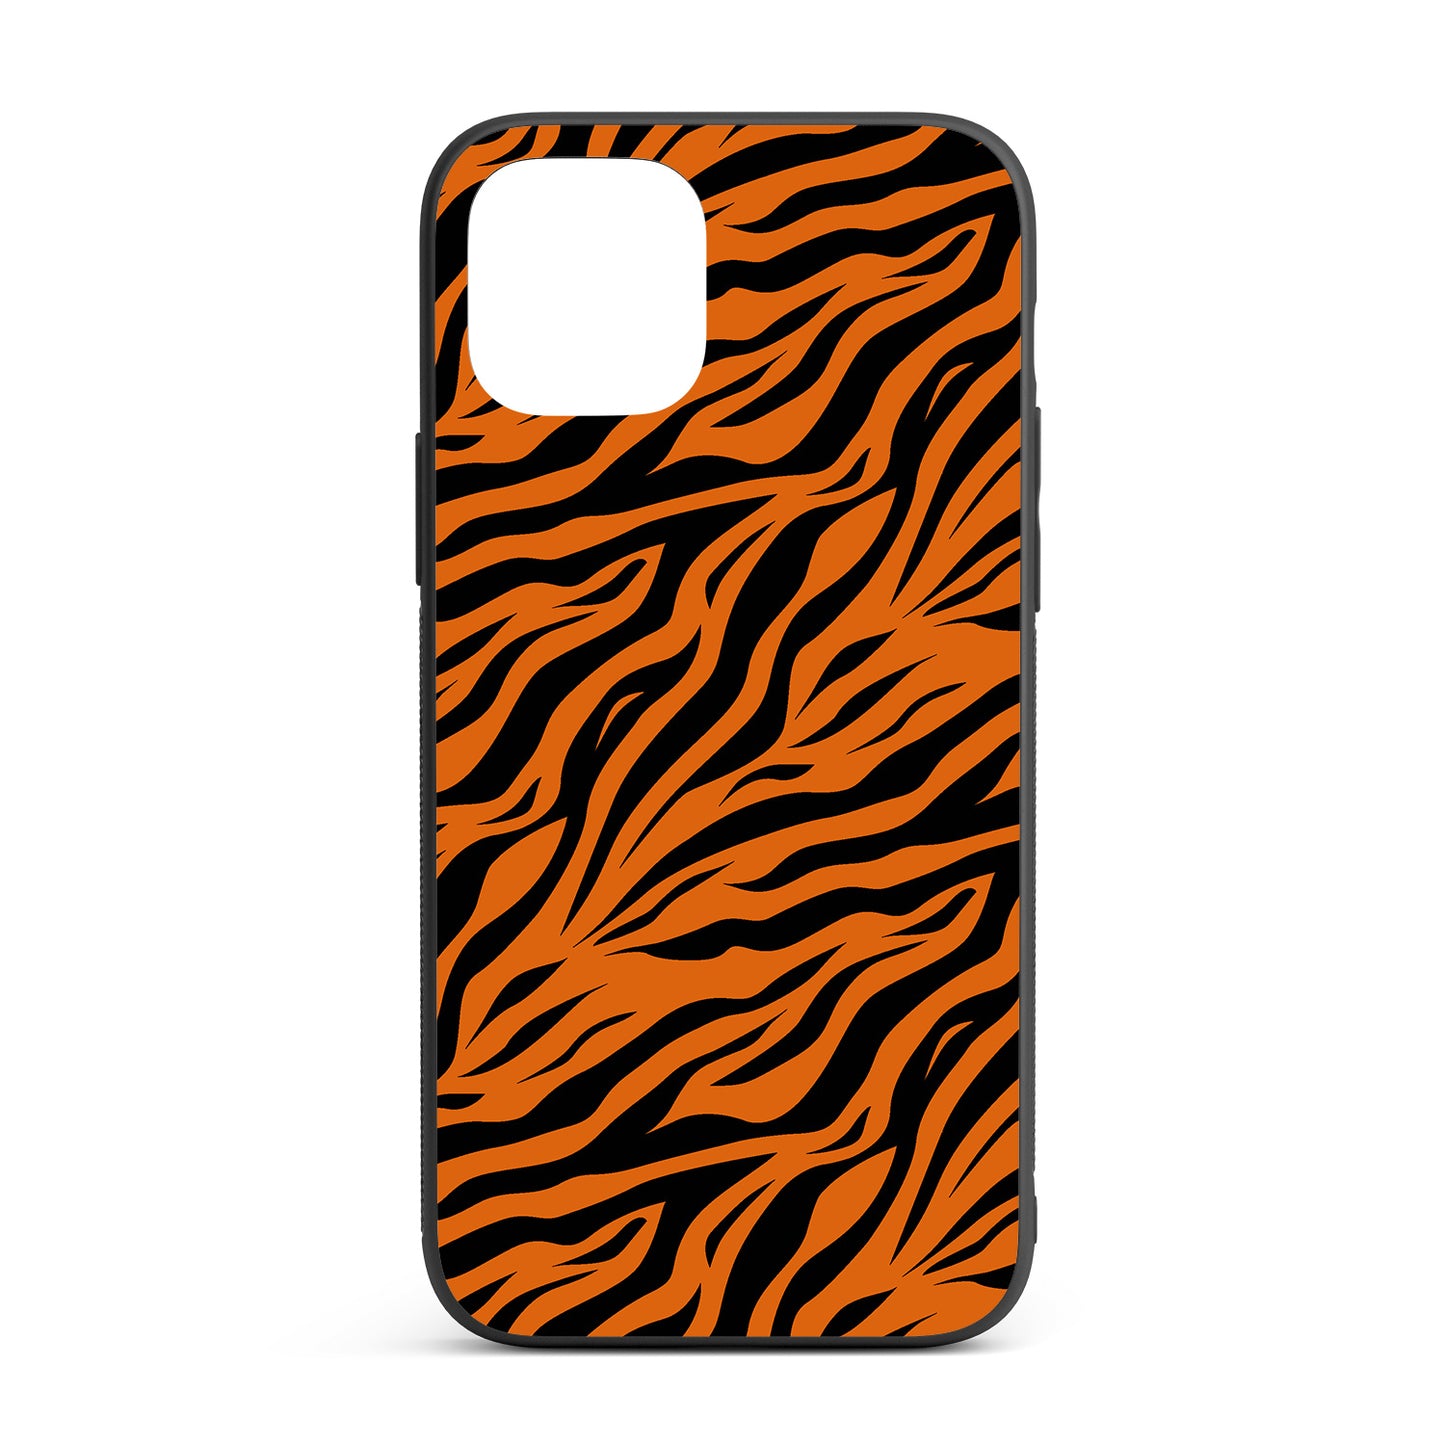 Tiger iPhone glass case